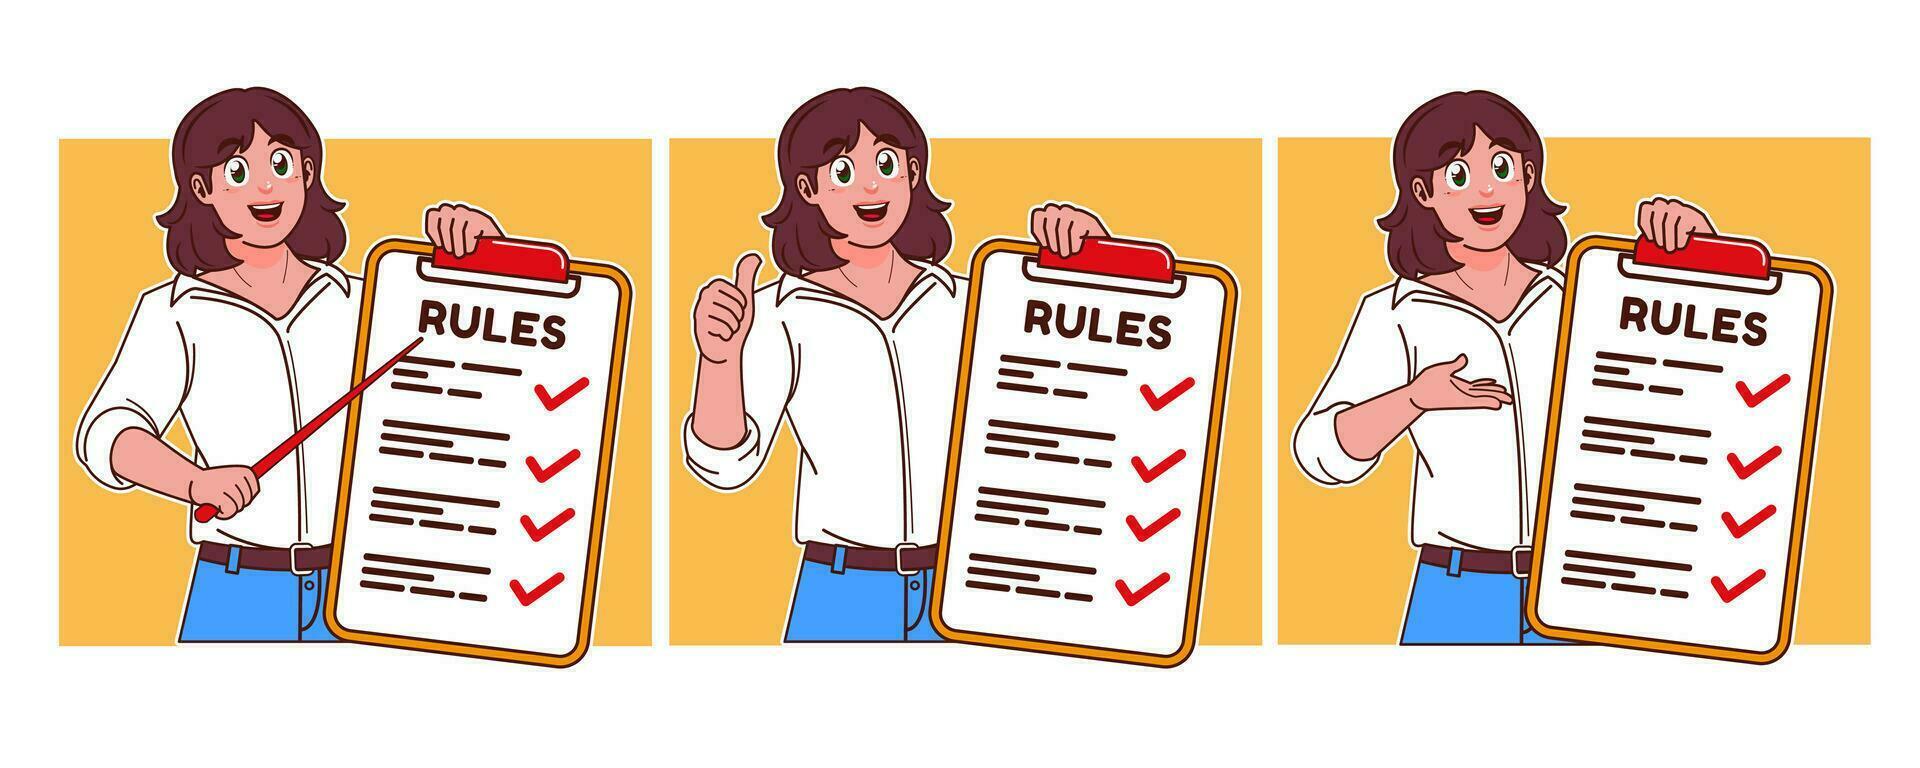 Women explaining rules and guidelines vector